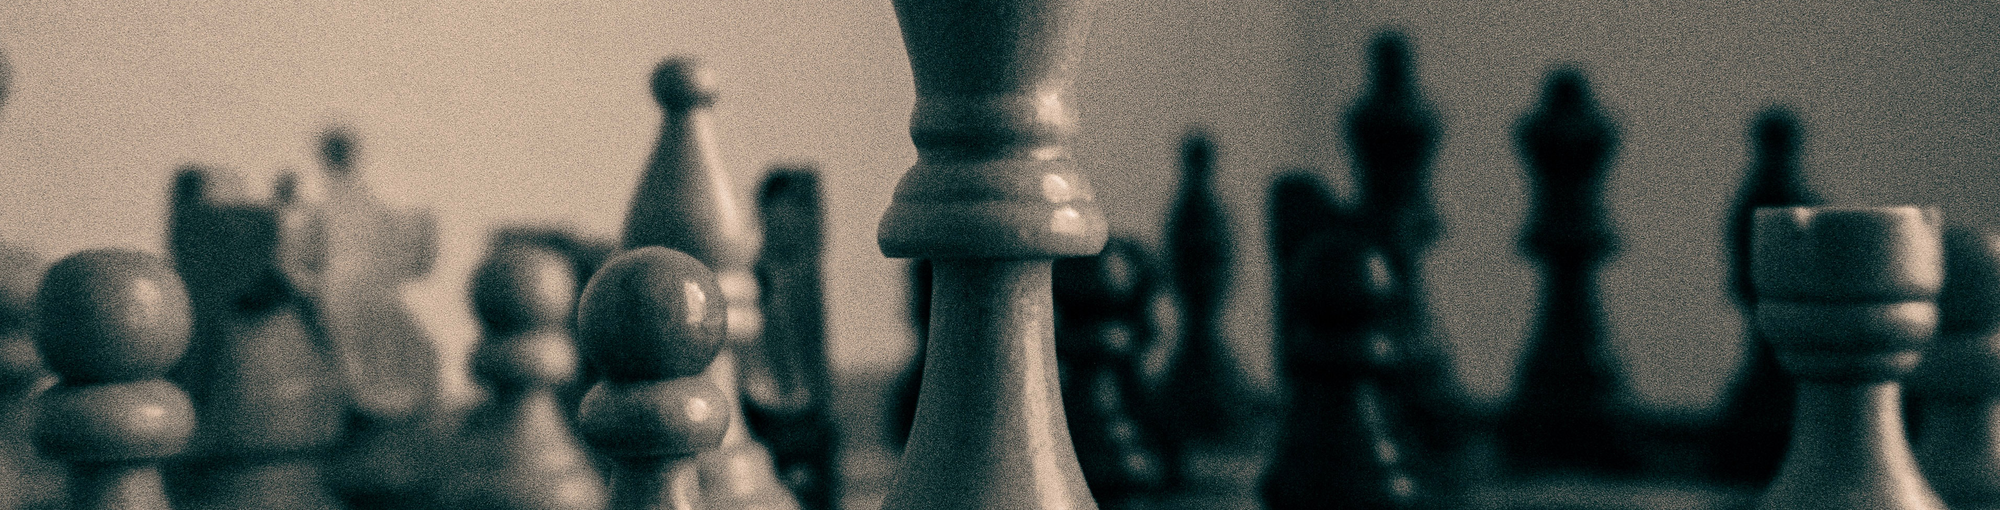 A chess board shows the importance of strategy required to drive better results